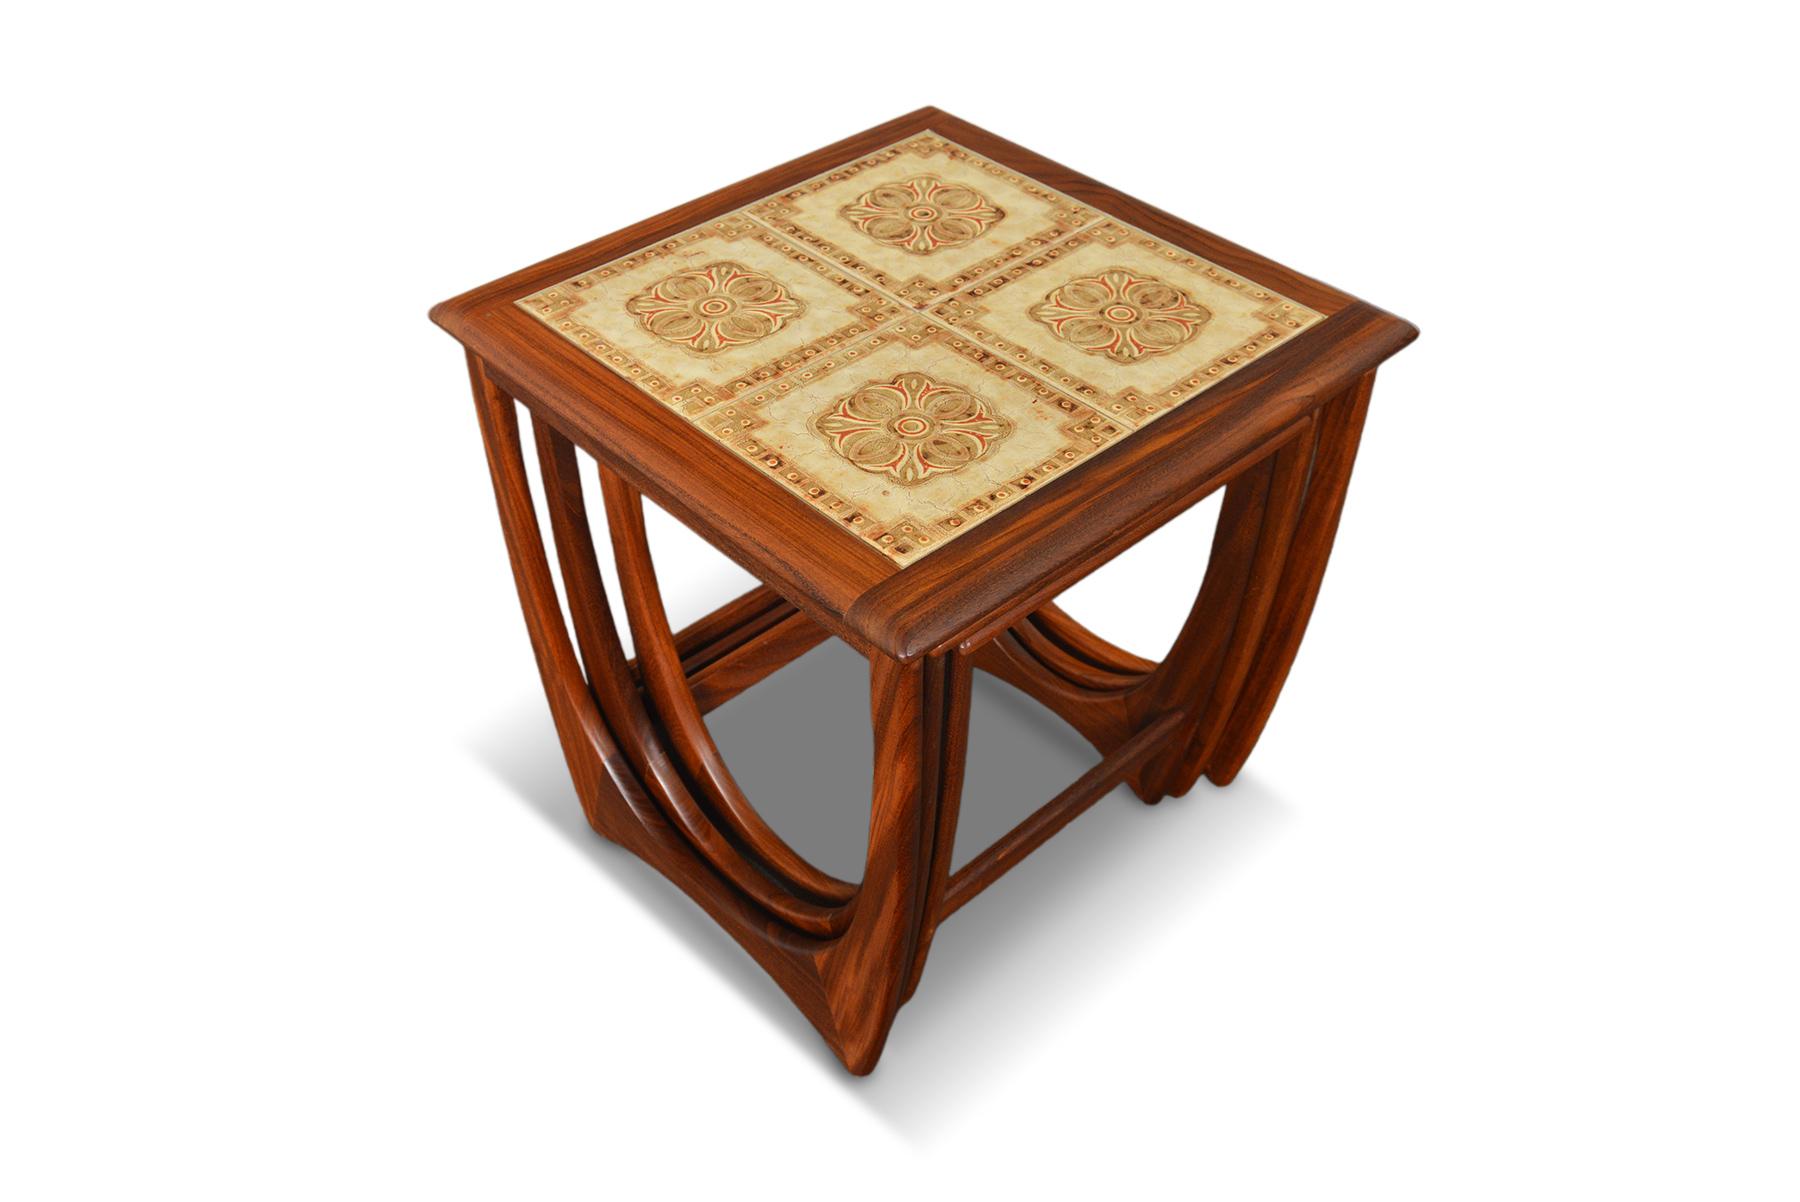 Teak G Plan Astro Nesting Tables With Tile Top #1 For Sale